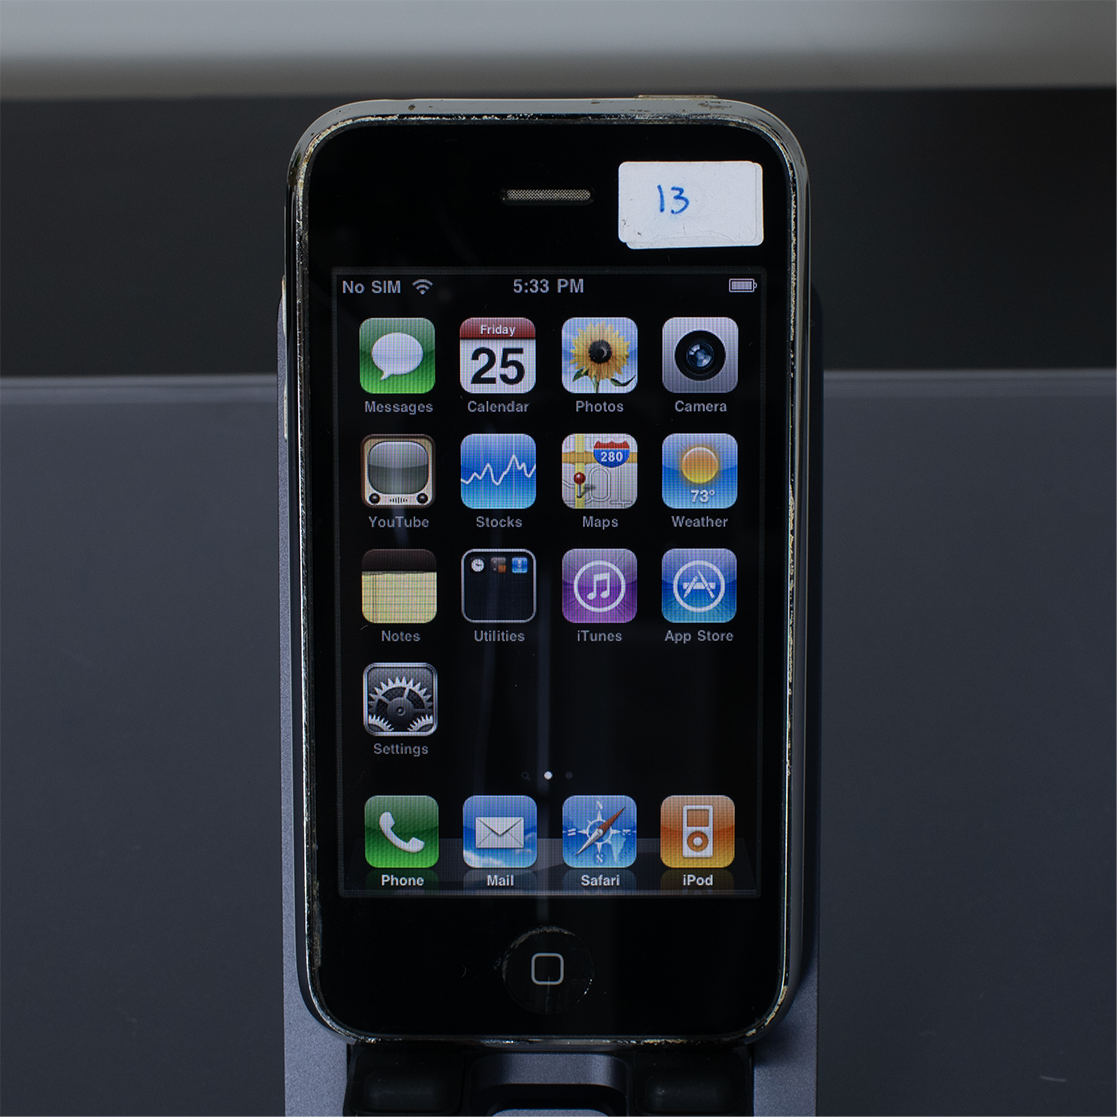 iPhone 3G - 16GB - iOS 4.2.1 - Locked (AT&T) - Good condition